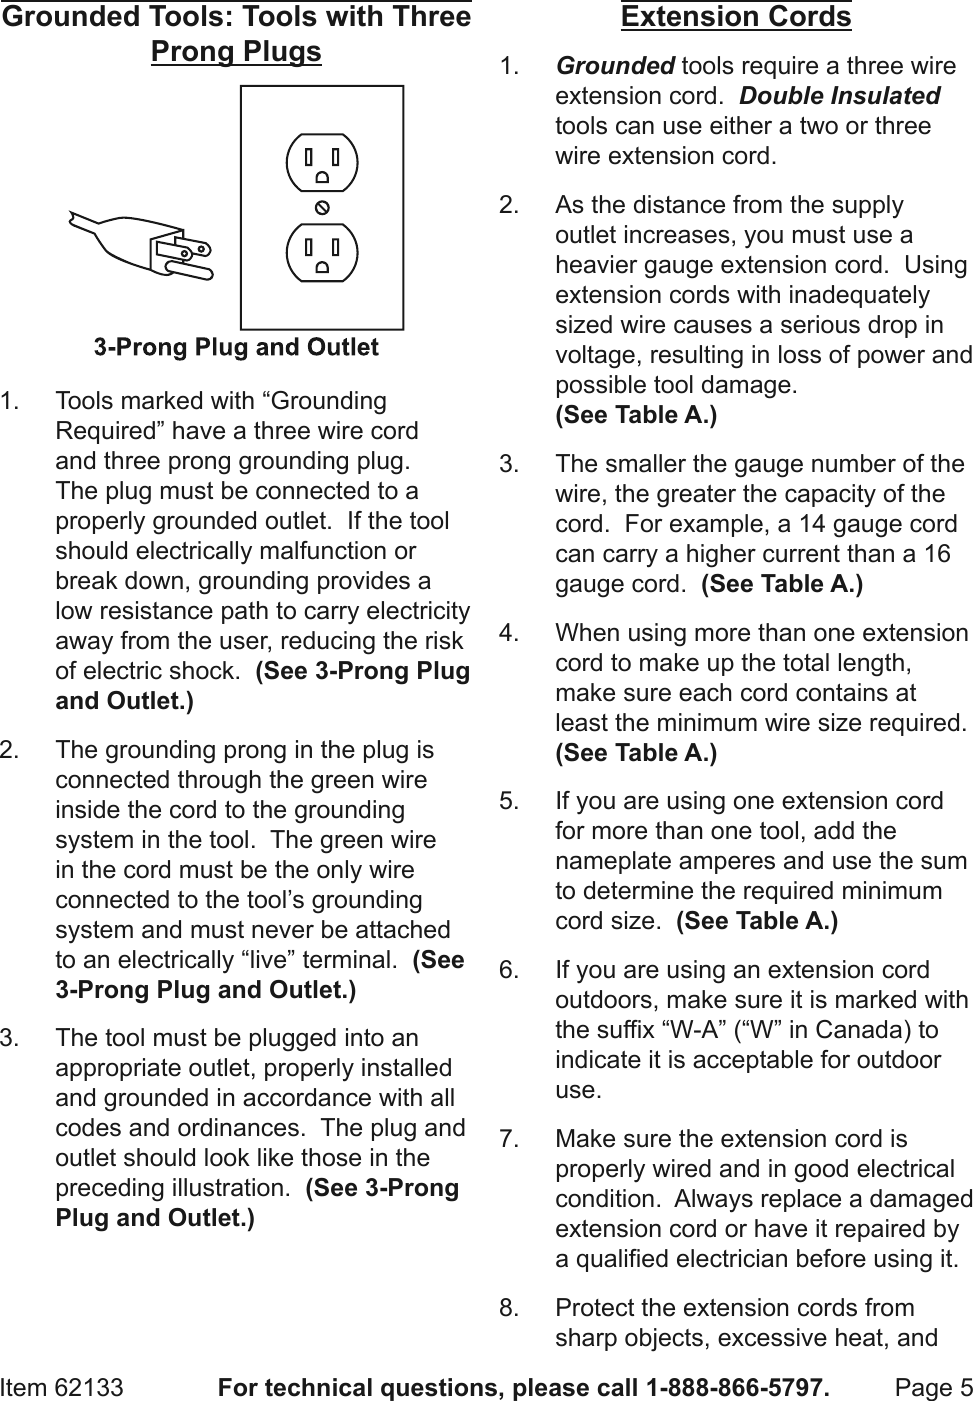 Page 5 of 12 - Harbor-Freight Harbor-Freight-Heat-Bond-Carpet-Seaming-Iron-Product-Manual-  Harbor-freight-heat-bond-carpet-seaming-iron-product-manual